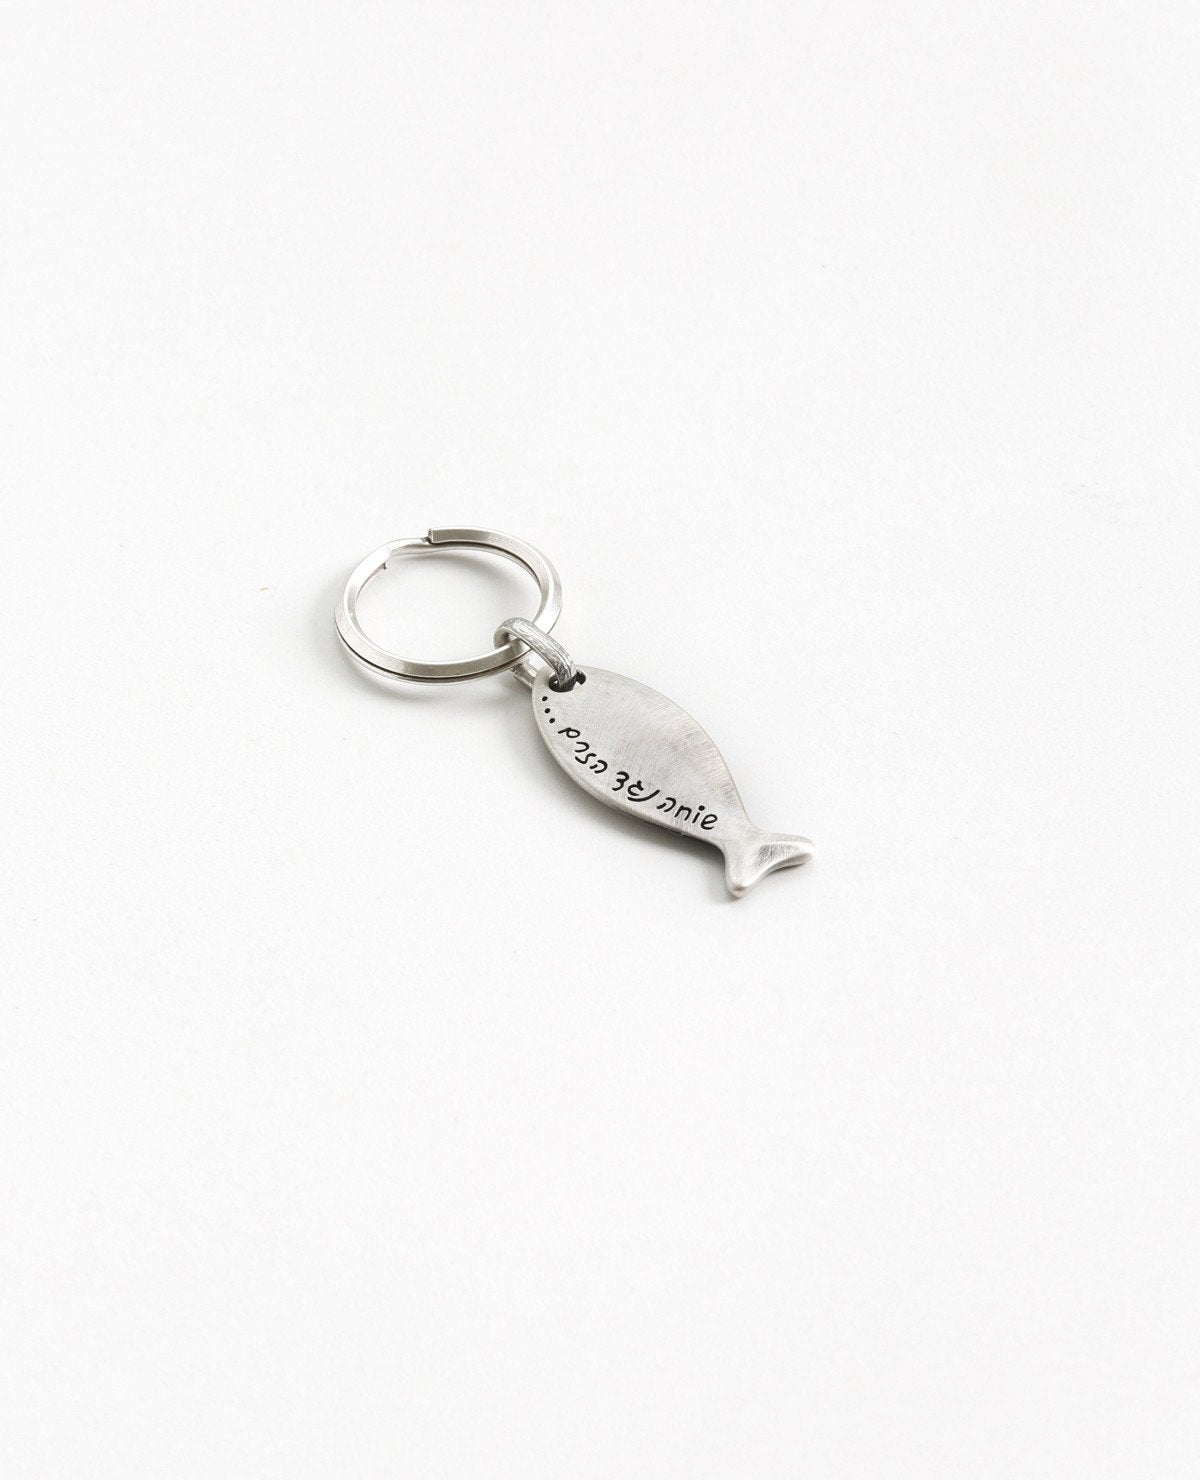 Sometimes we swim against the current to maintain integrity to our own personal statement. This fish shaped keychain is coated in sterling silver and has the words "swimming against the current" engraved onto it. The most suitable gift for when you want to remind someone close that it is allowed and even recommended to always be true to yourself and your inner voice. This keychain is motivating, strong and reliable.  Length: 6 cm  Width: 1 cm